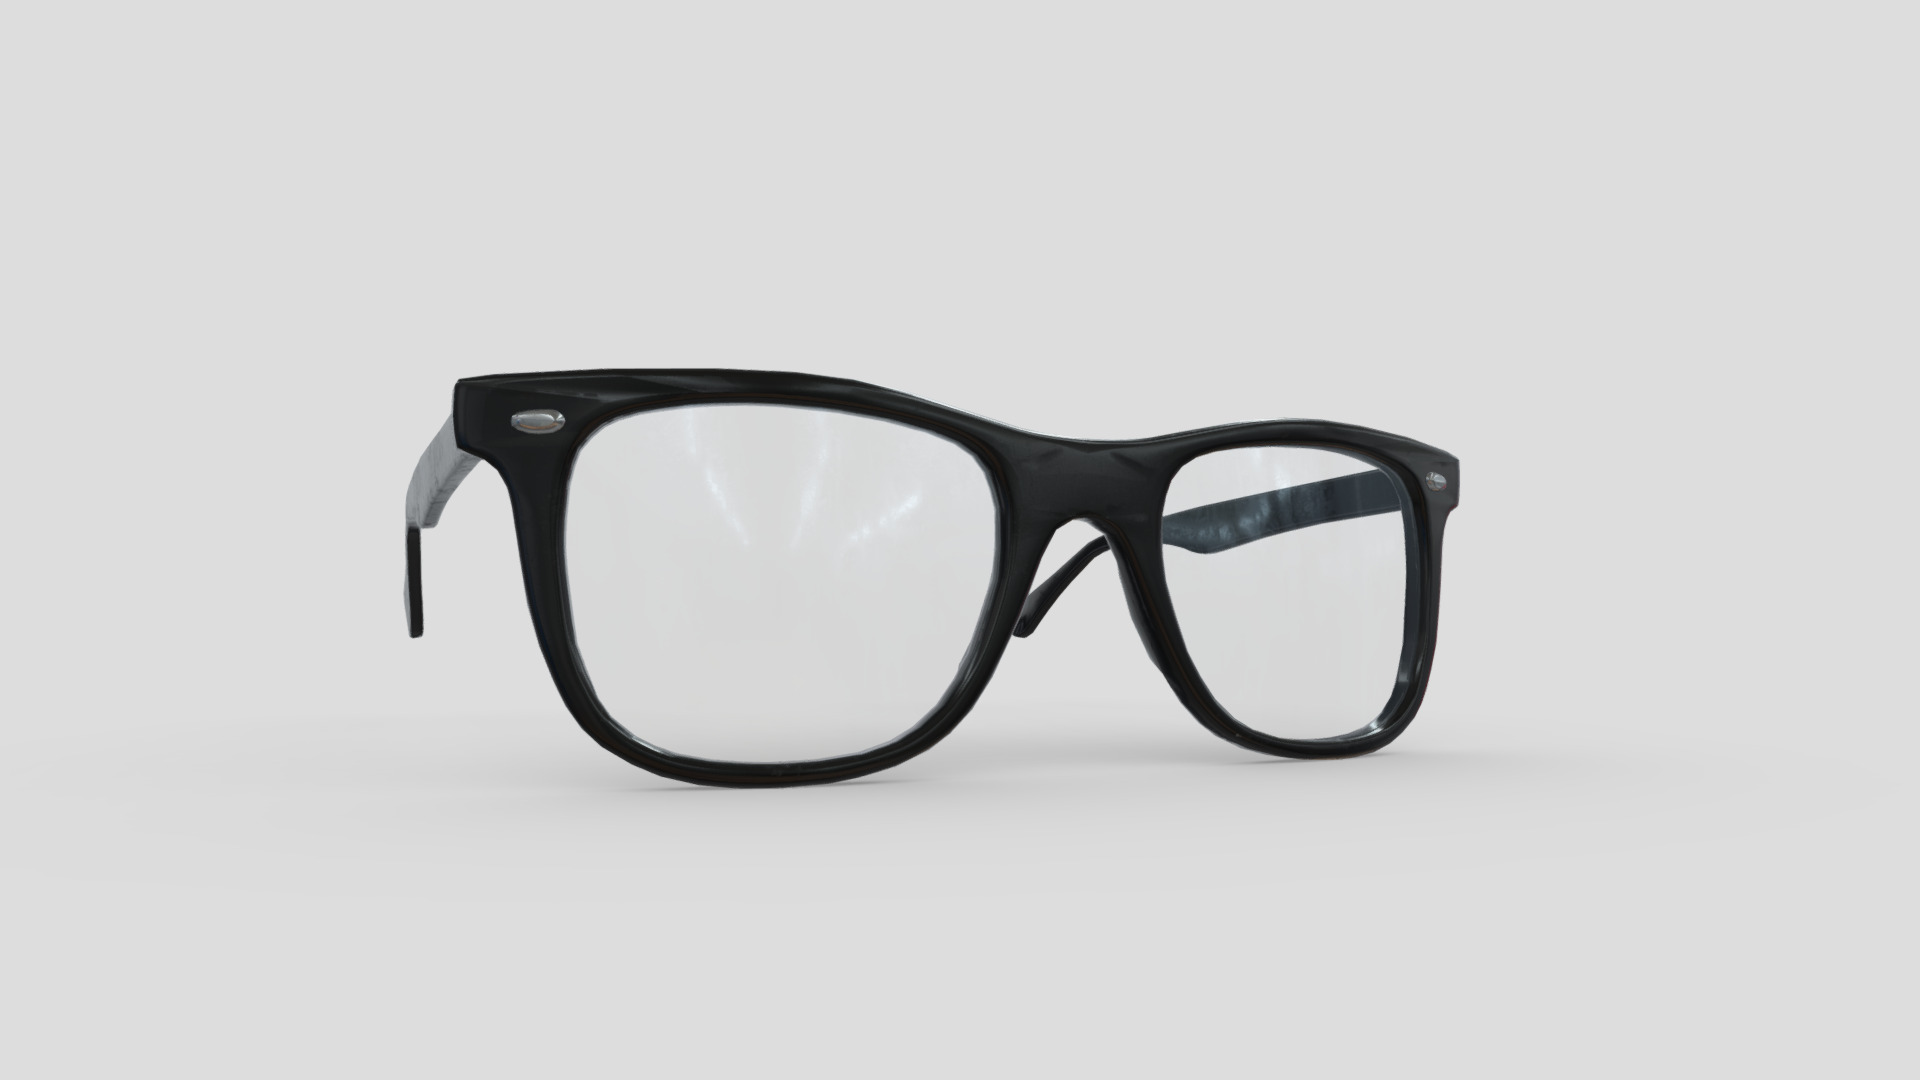 3D model Glasses 2 - This is a 3D model of the Glasses 2. The 3D model is about a pair of black framed glasses.